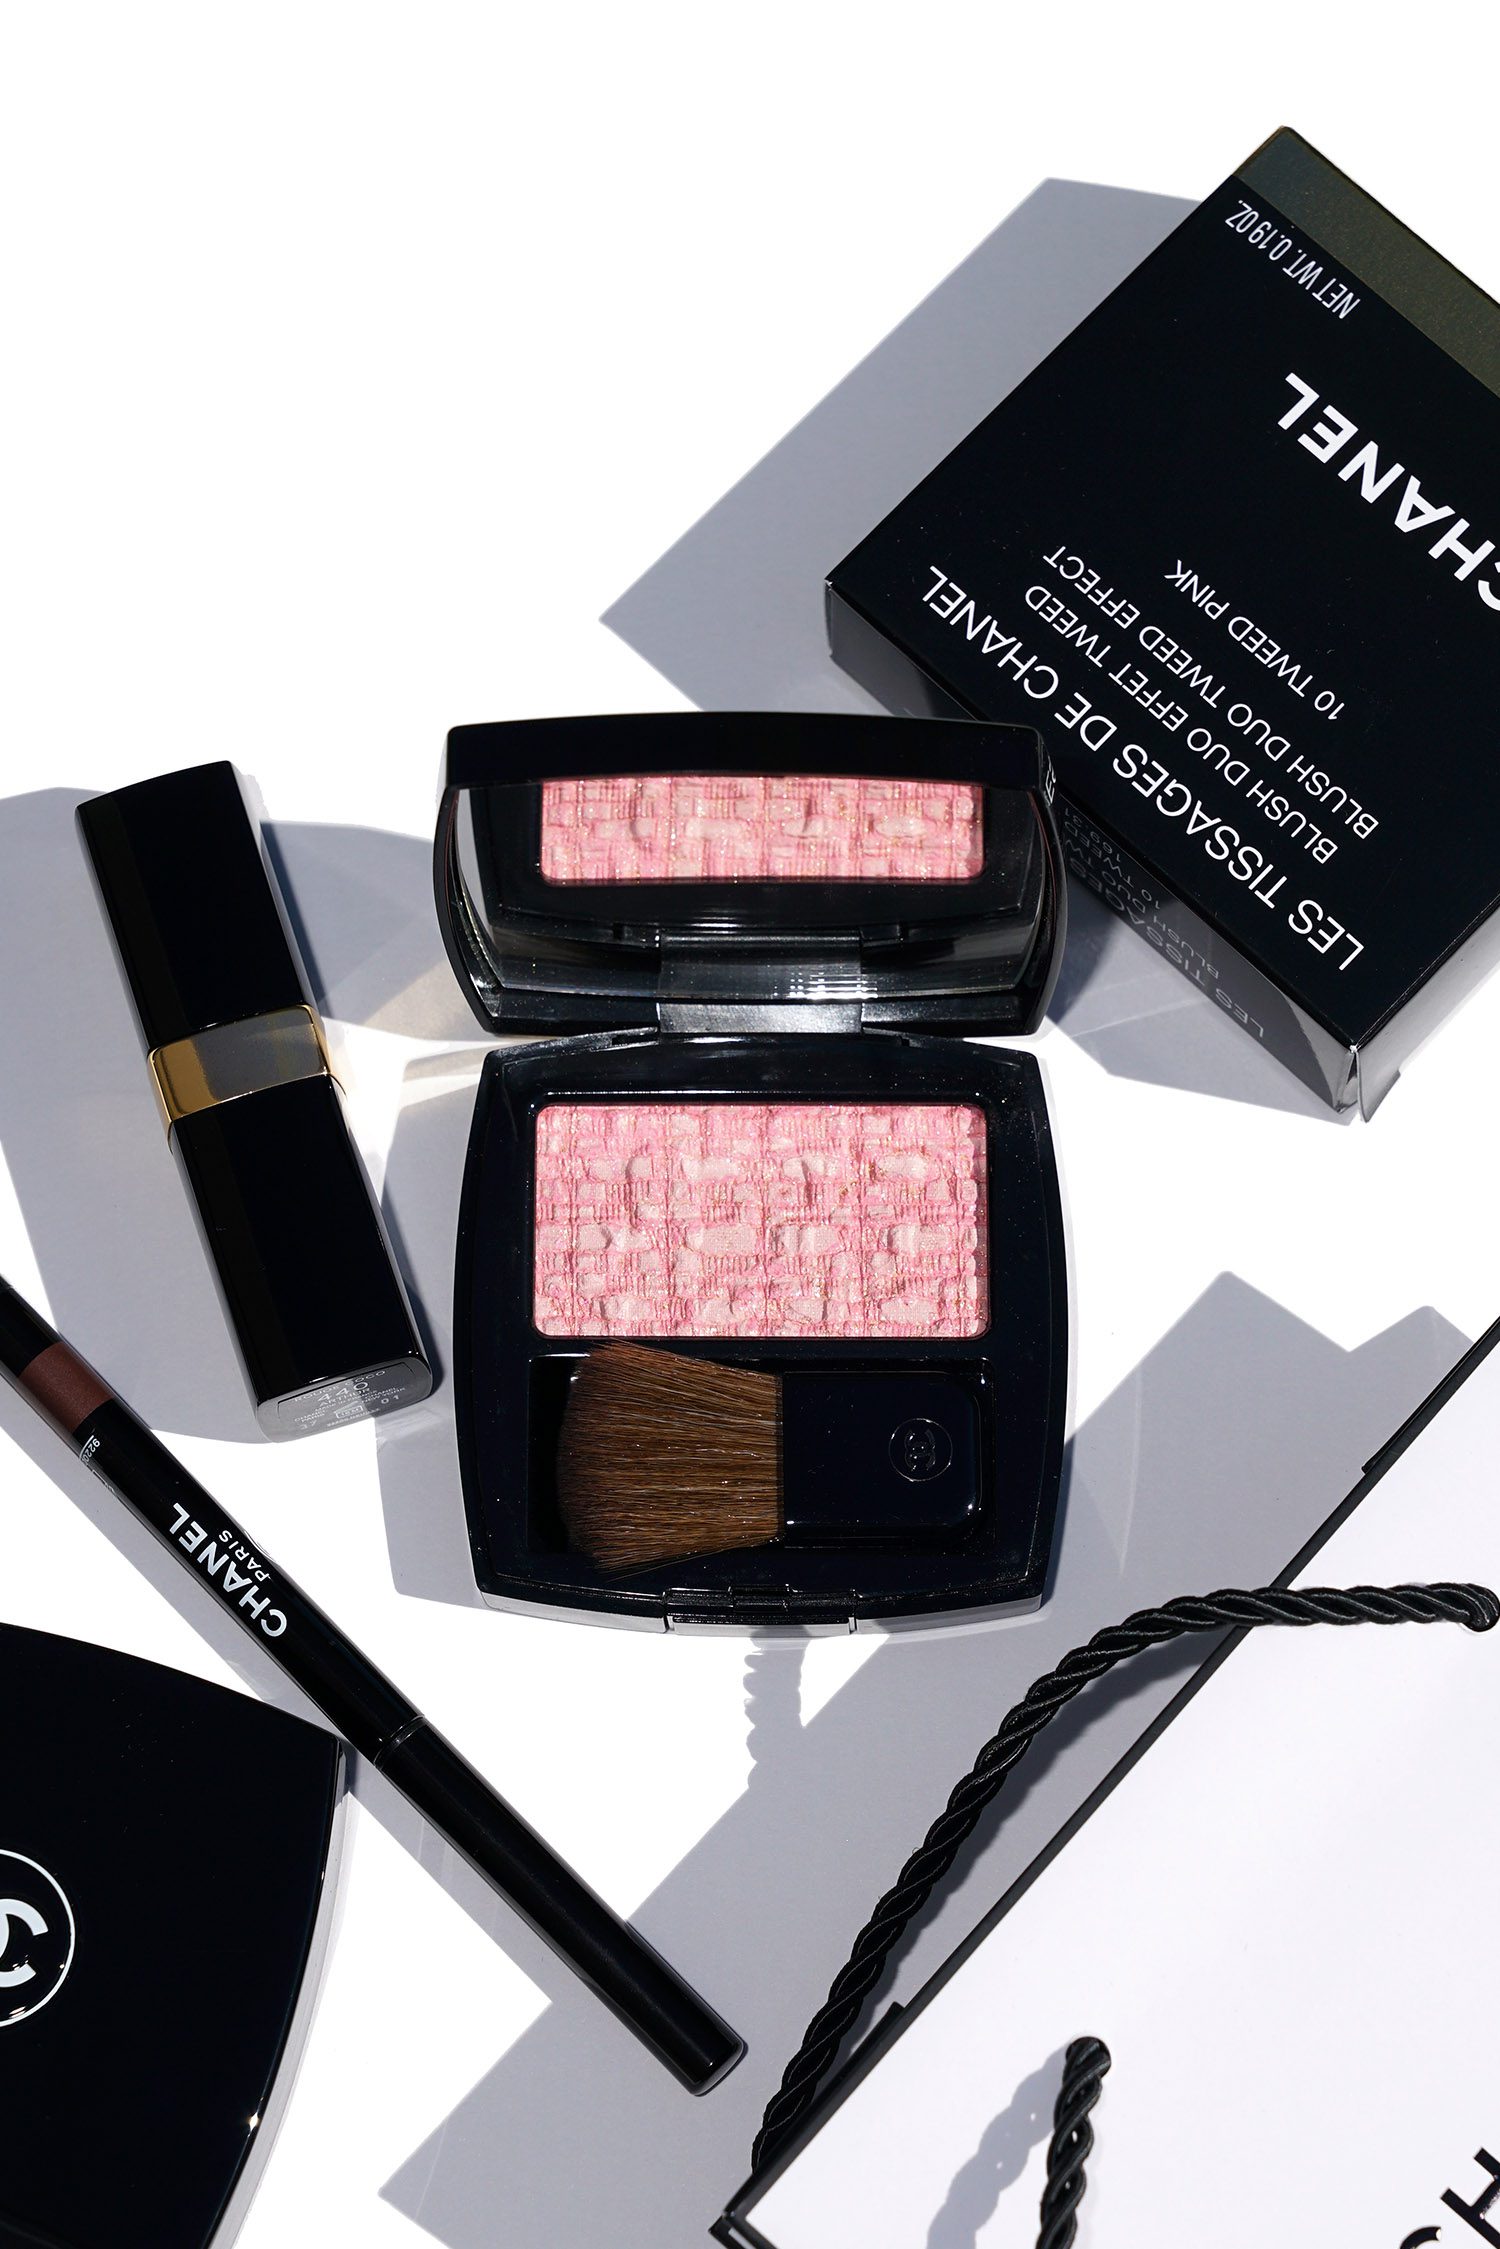 Chanel Les Tissages de Chanel Tweed Pink - The Beauty Look Book